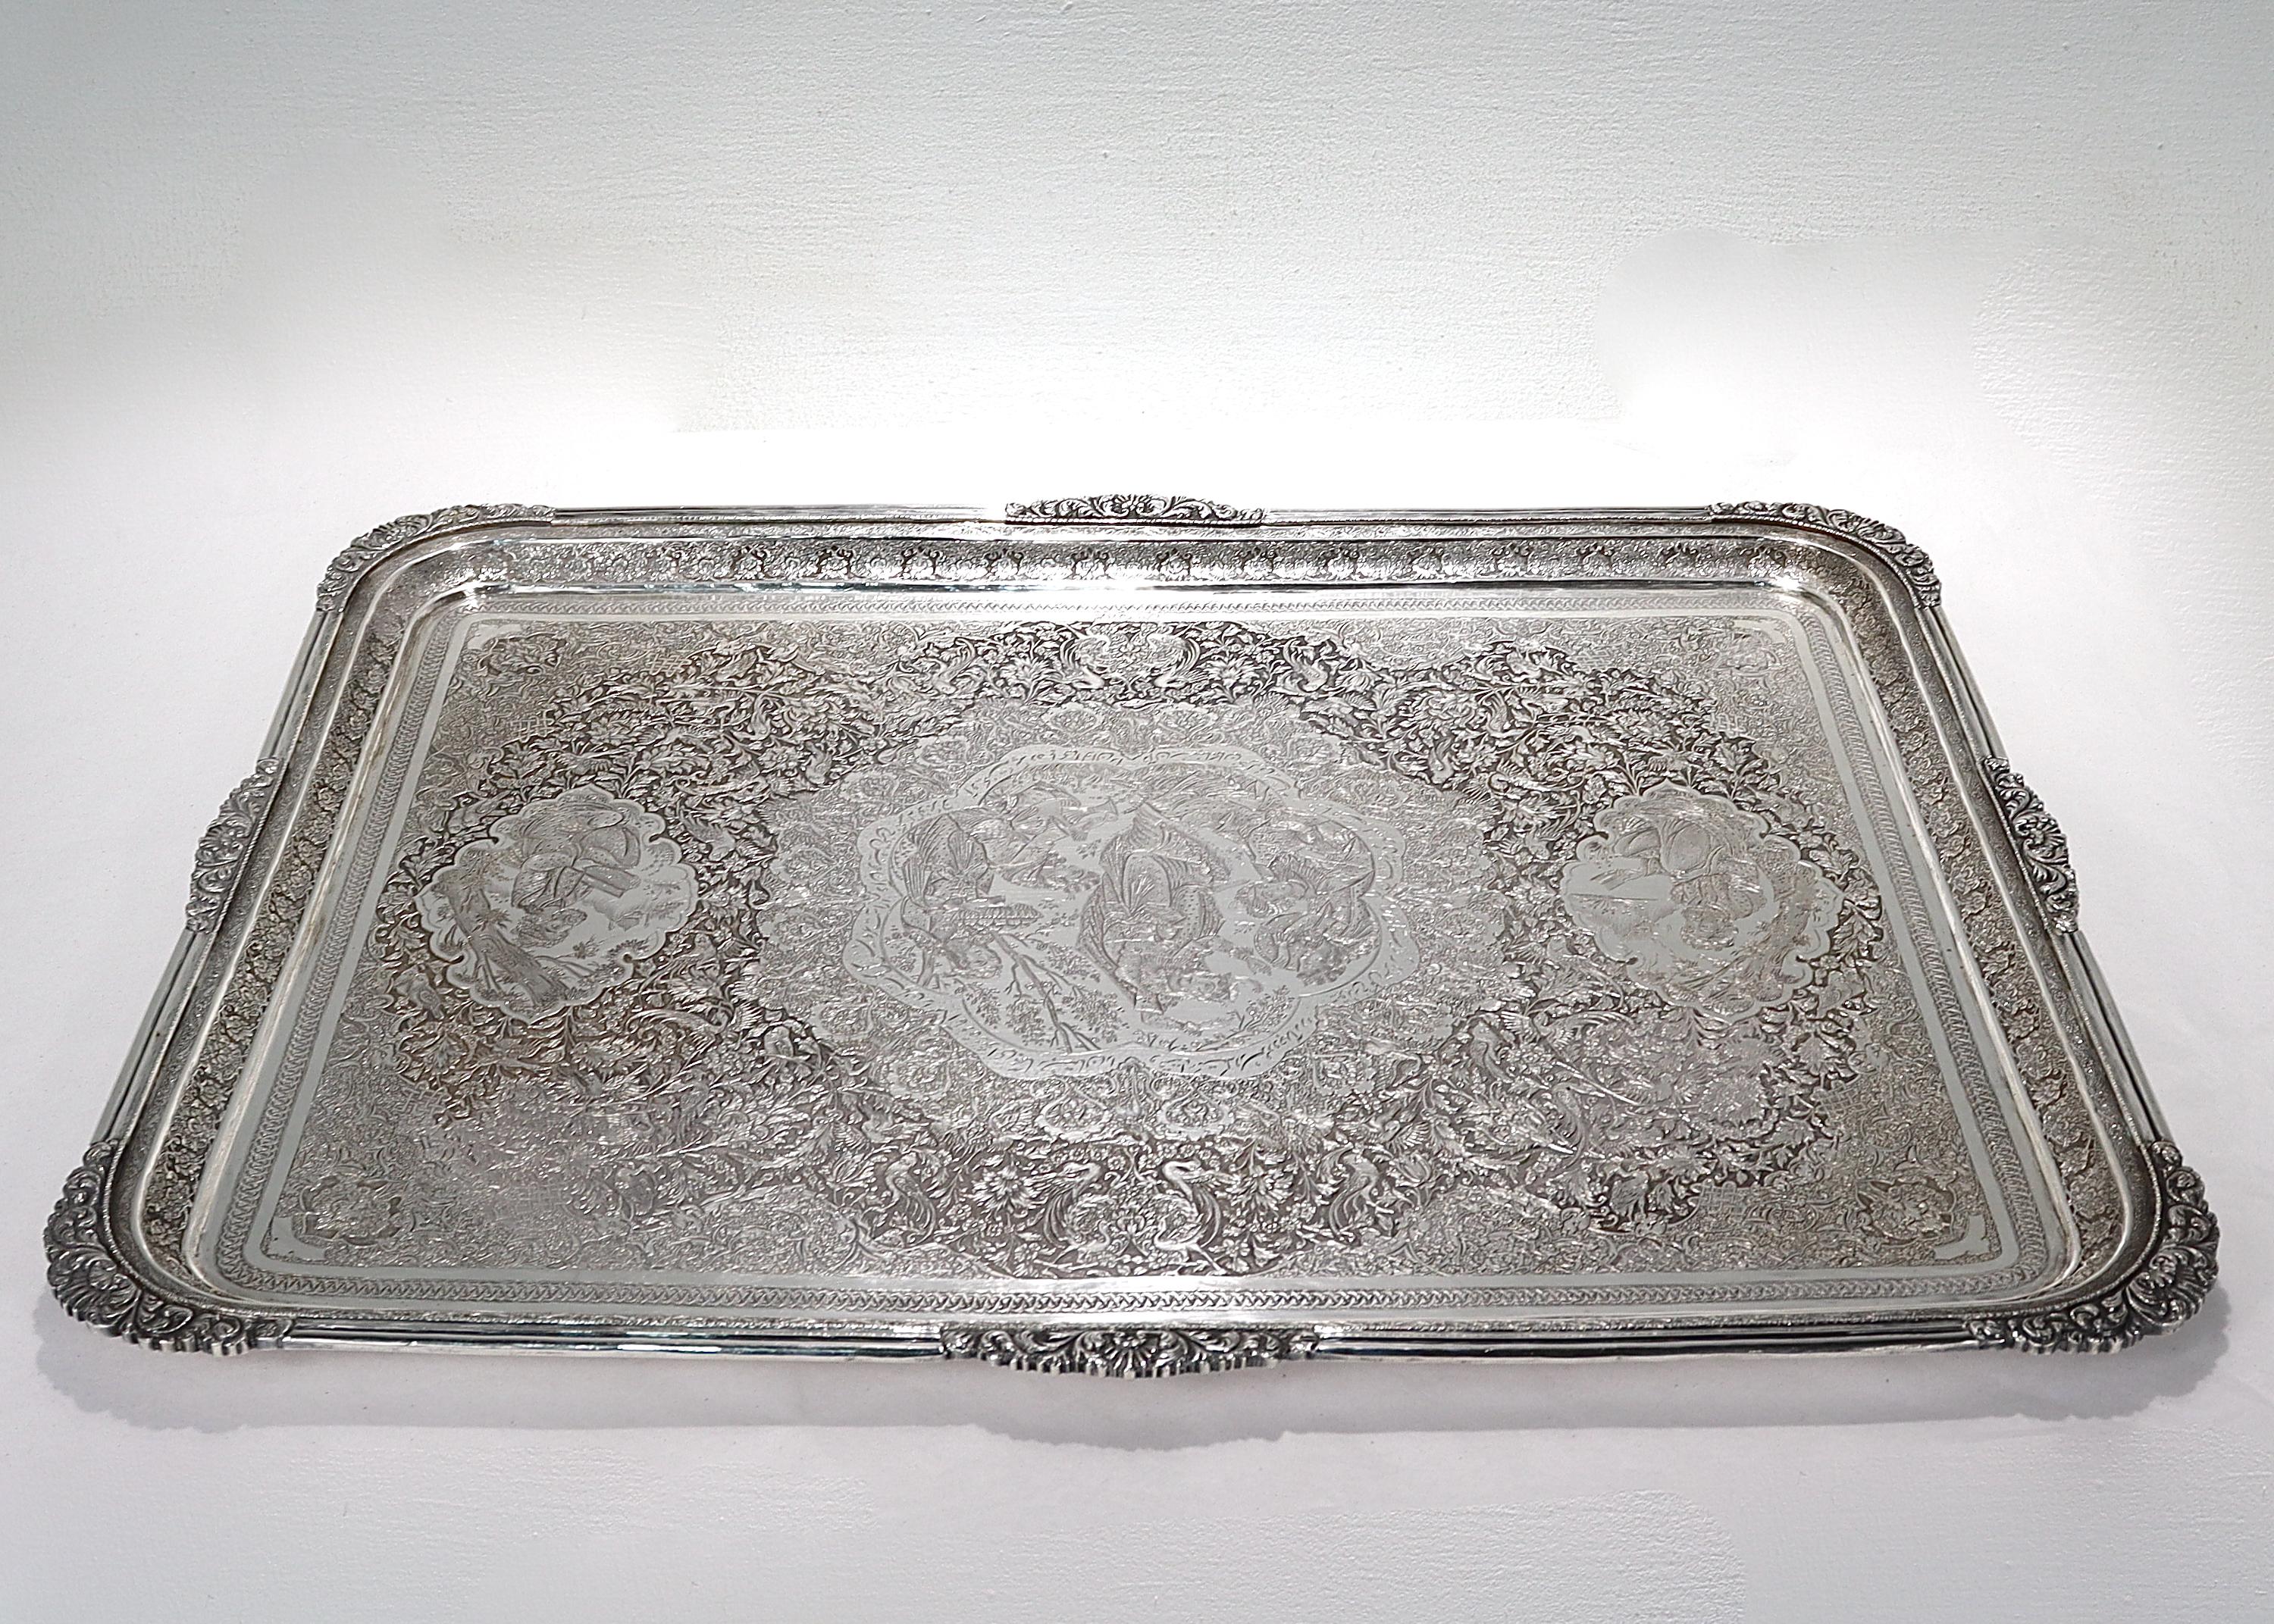 Old or Antique Signed Islamic Ottoman or Persian Incised Silver Serving Tray In Good Condition For Sale In Philadelphia, PA